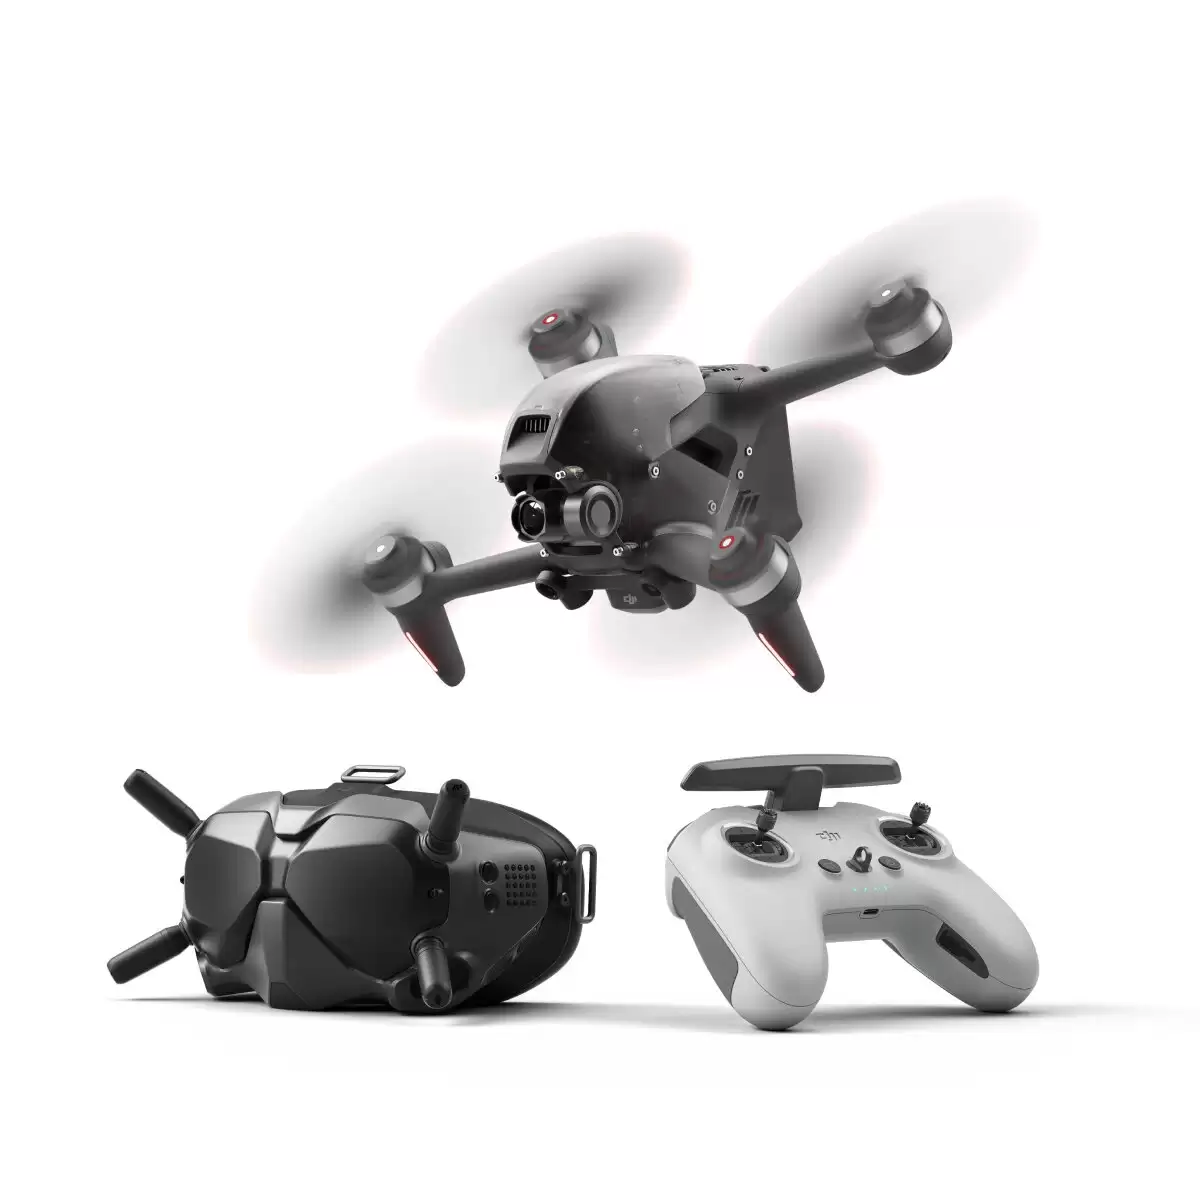 Order In Just $1249.00 Dji Fpv Combo 10km 1080p Fpv 4k 60fps 150° Fov Camera 20mins Flight Time 140 Km/h Speed Fpv Drone Rc Quadcopter Fpv Goggles V2 5.8ghz Transmitter Mode2 With This Coupon At Banggood